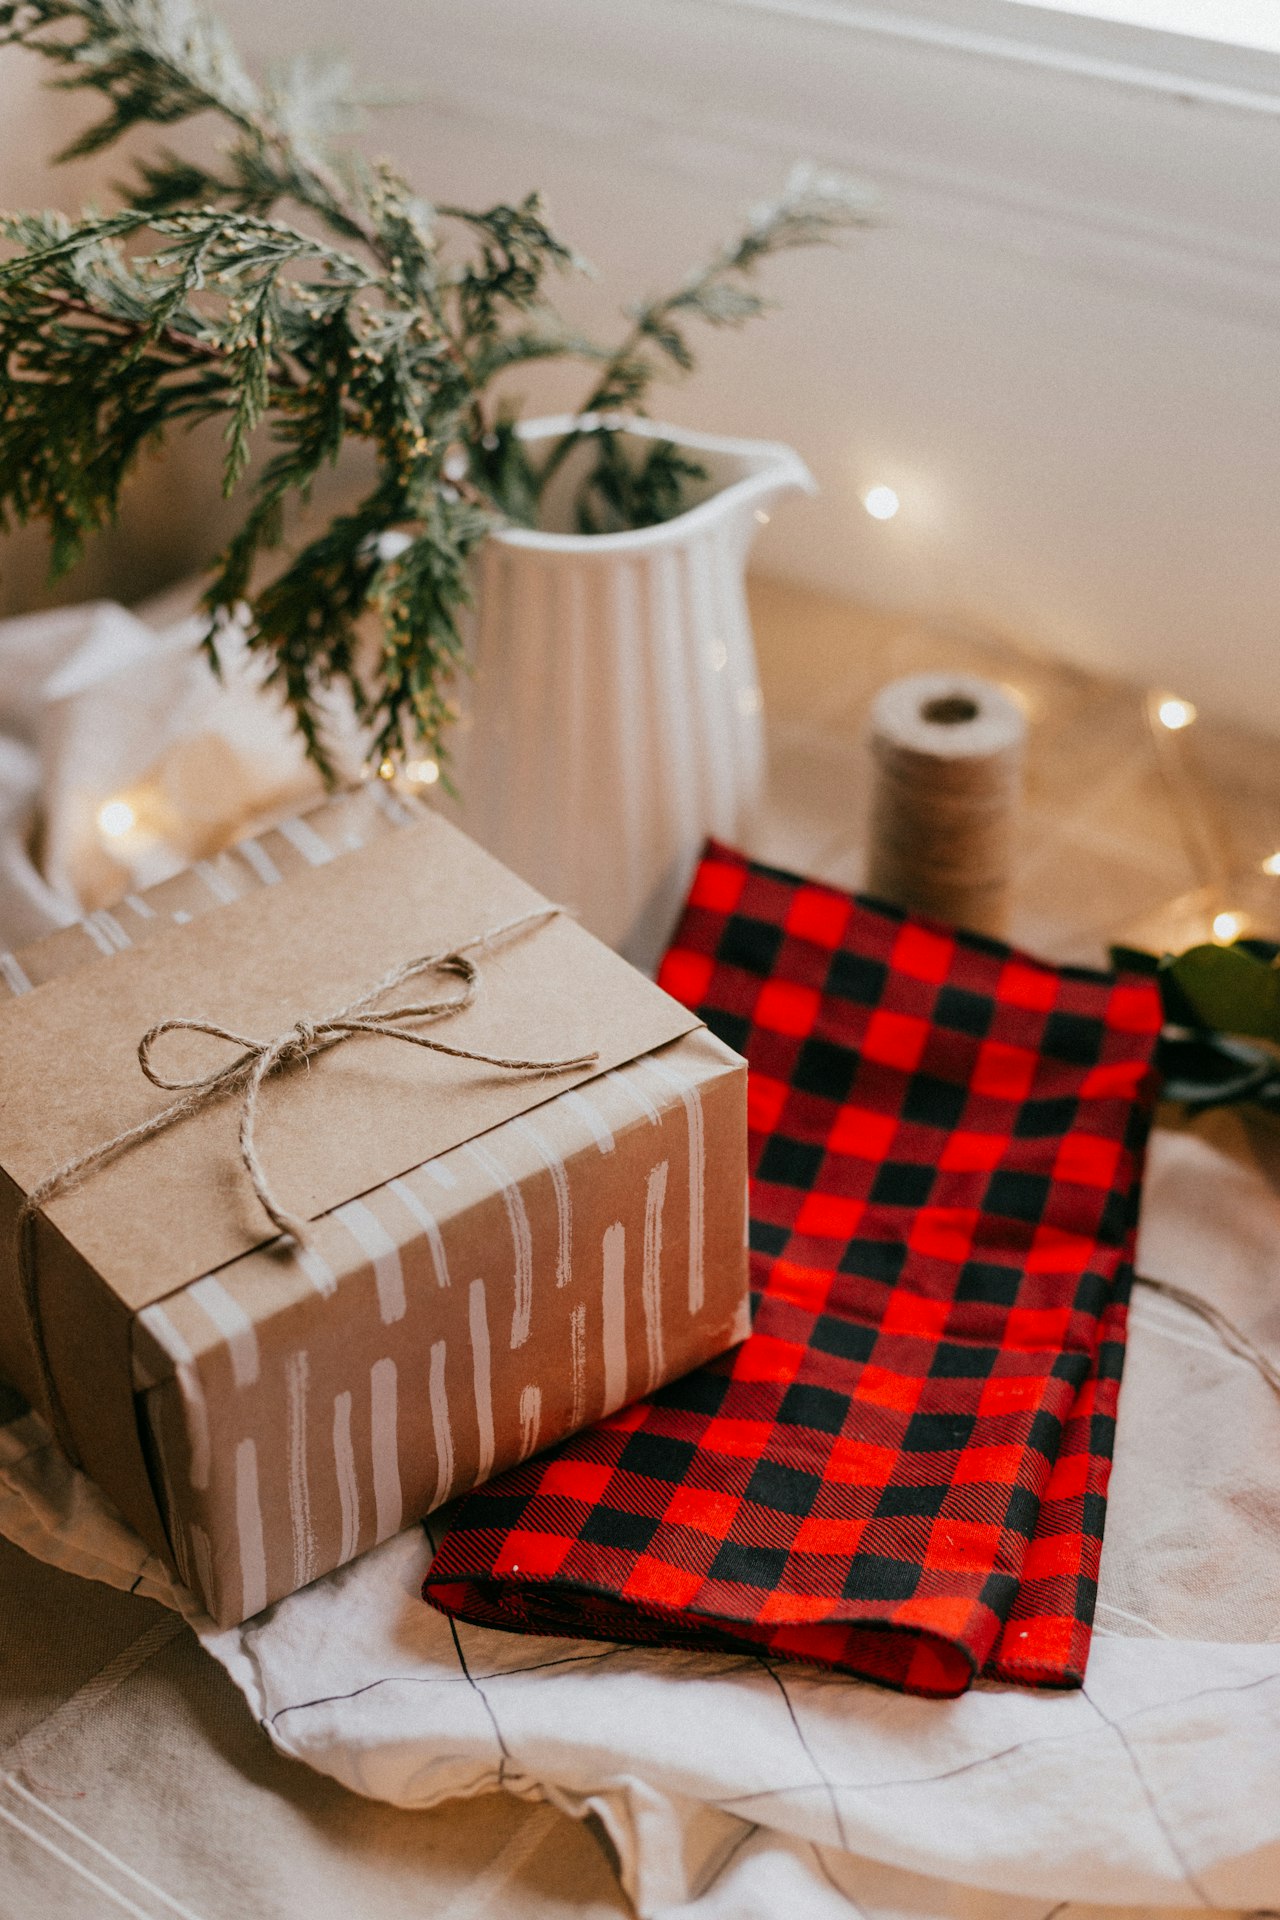 5 Tips to Giving Your Home a Holiday Facelift